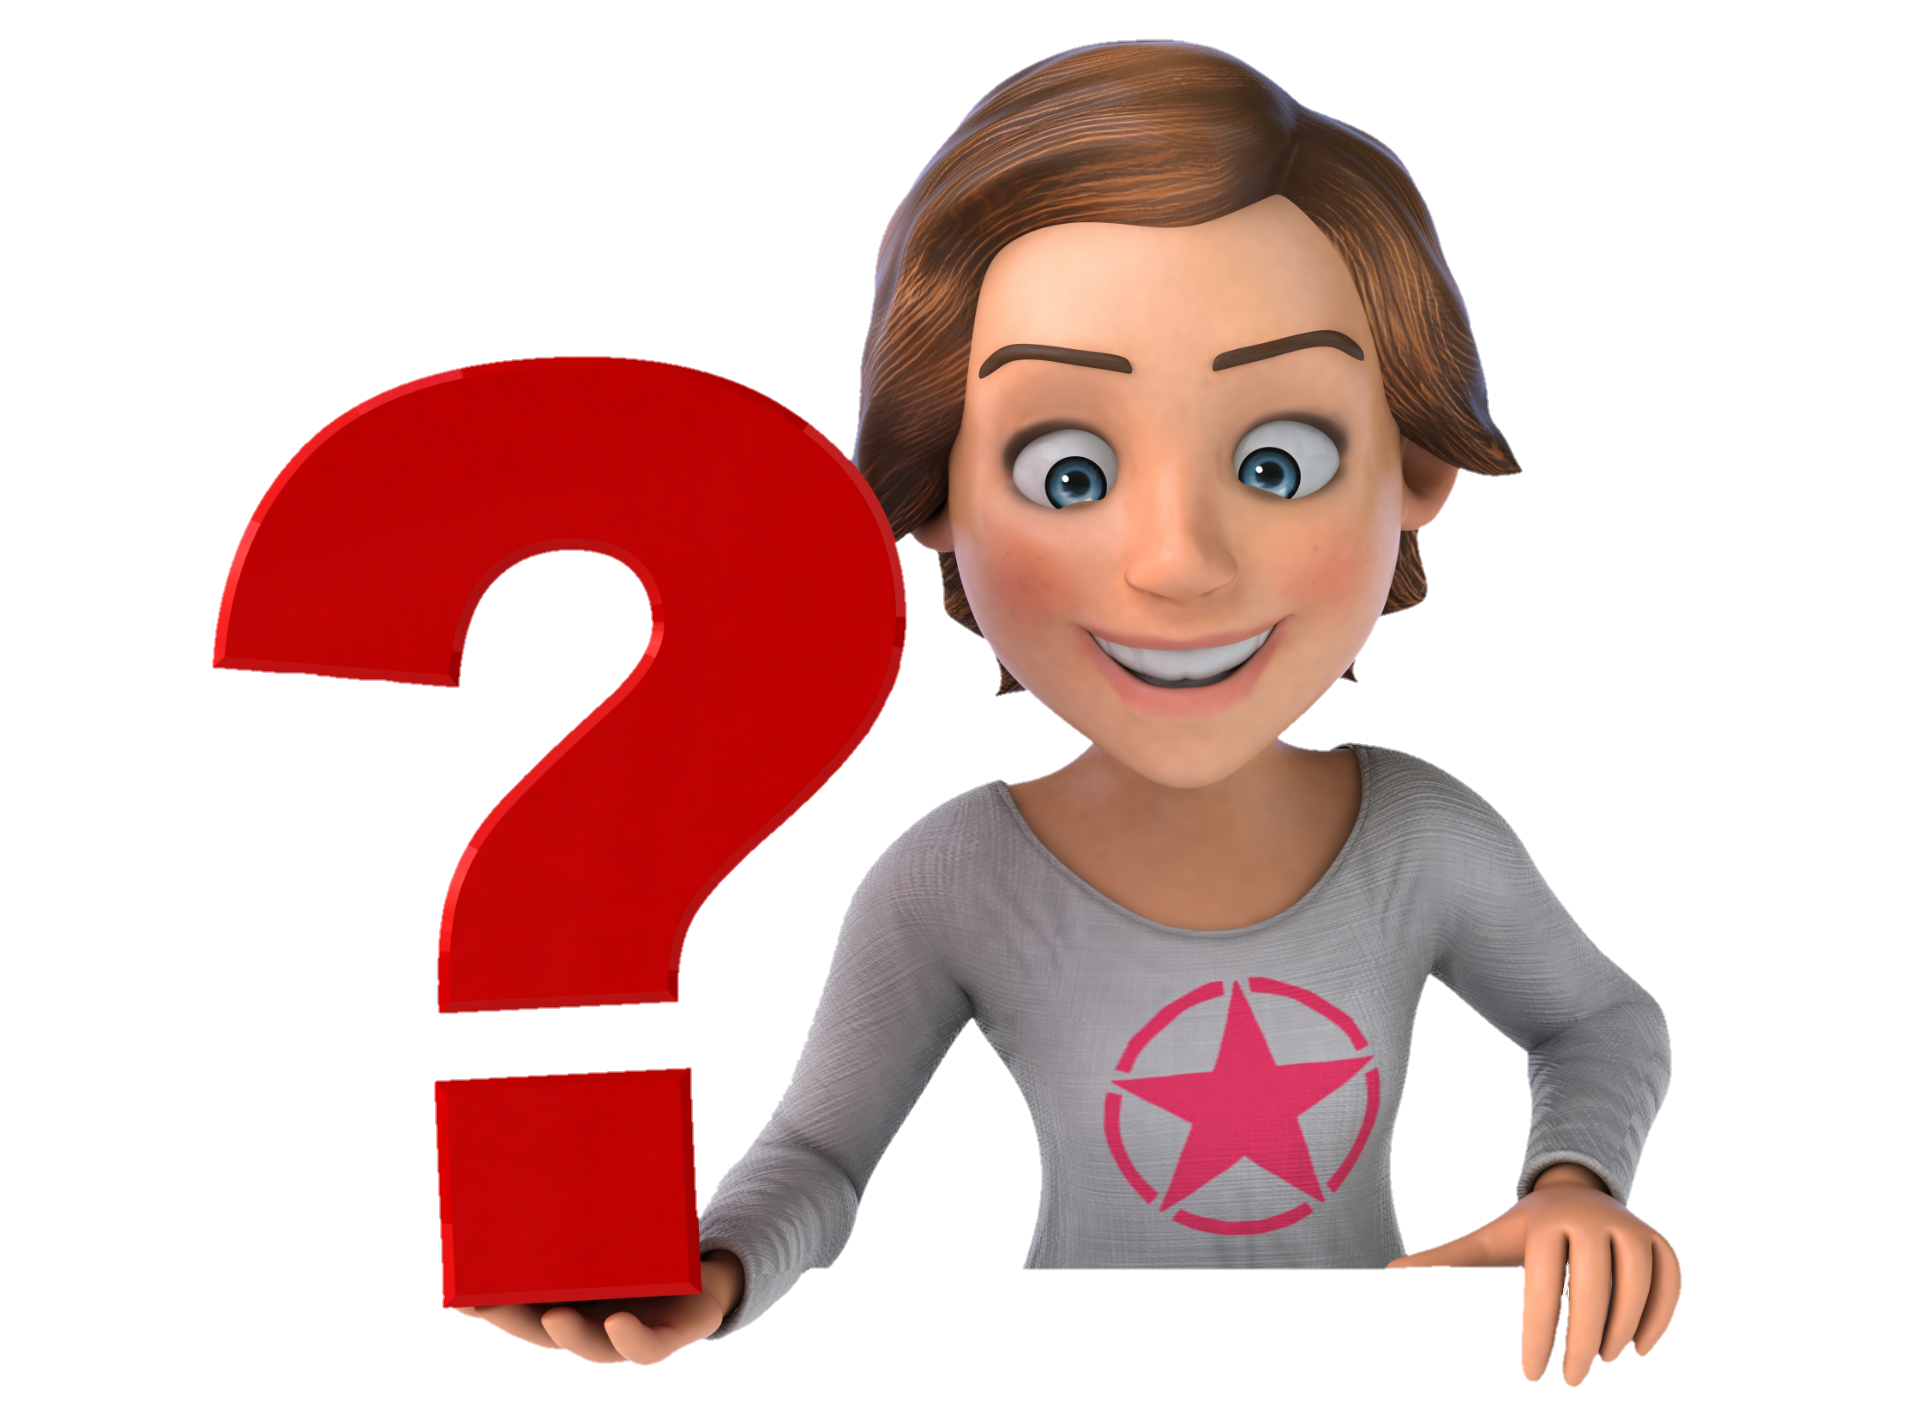 question-mark-png-from-pngfre-15